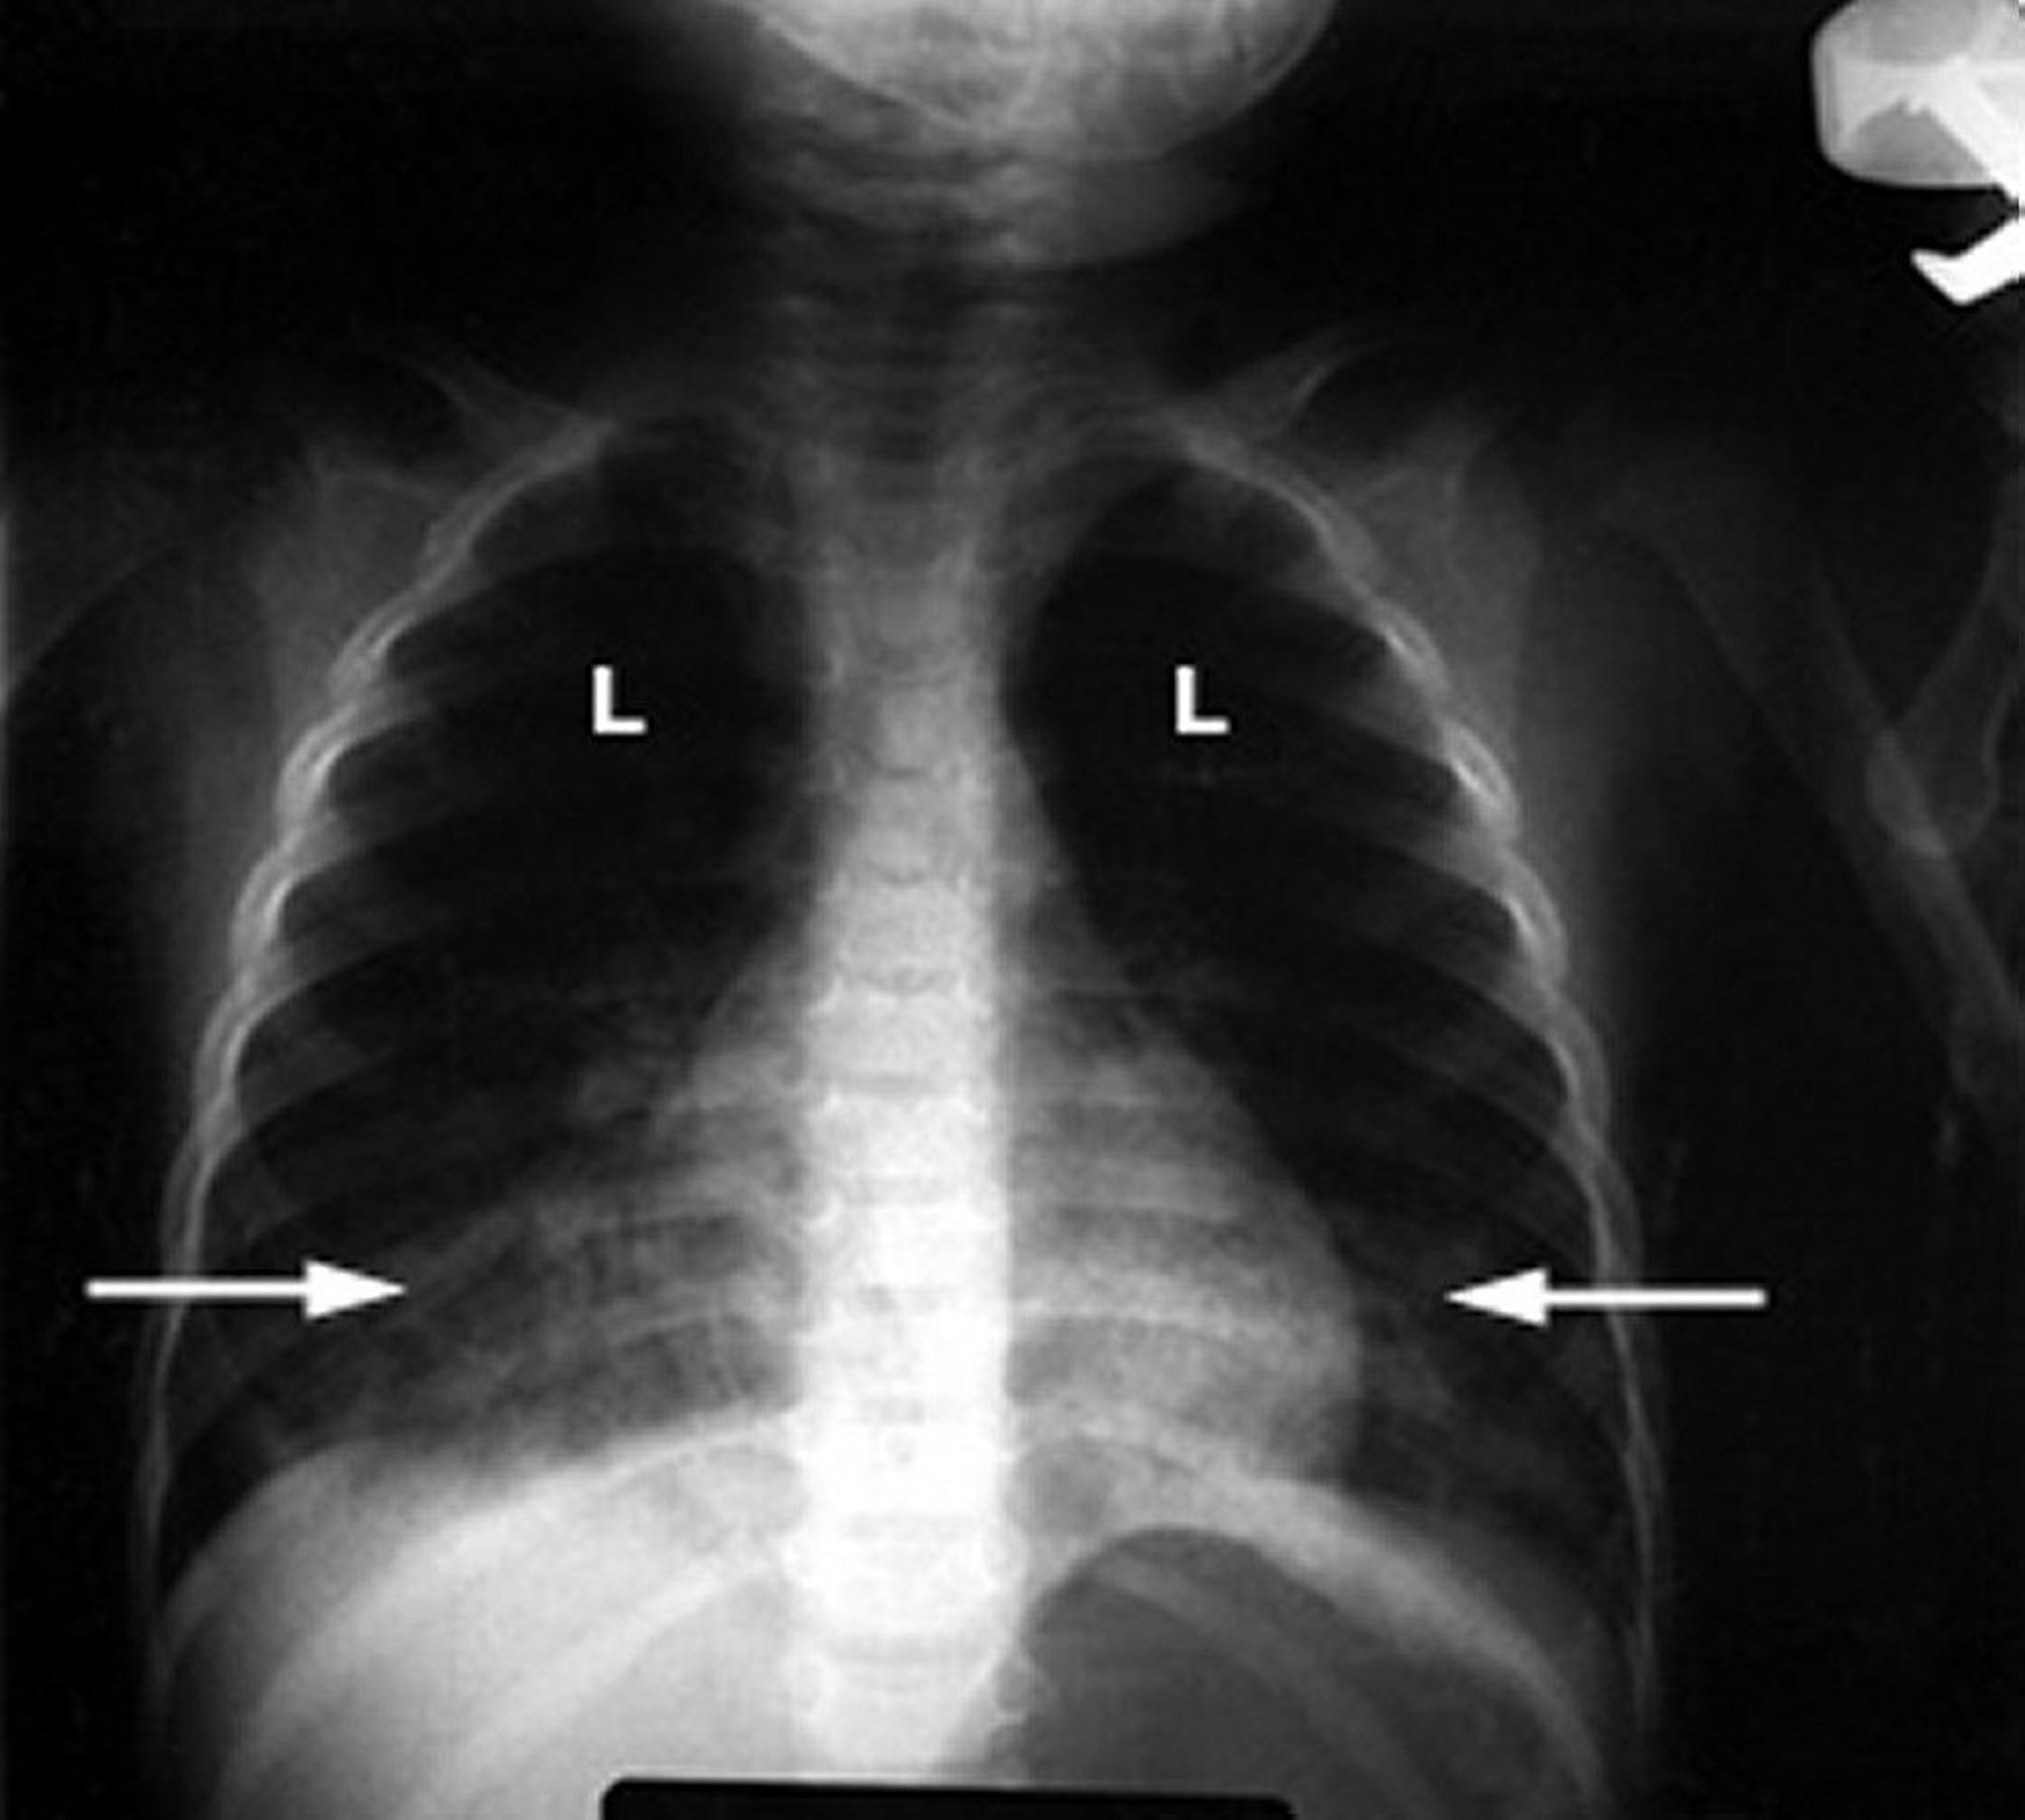 Chemical Pneumonitis Caused by Hydrocarbon Inhalation